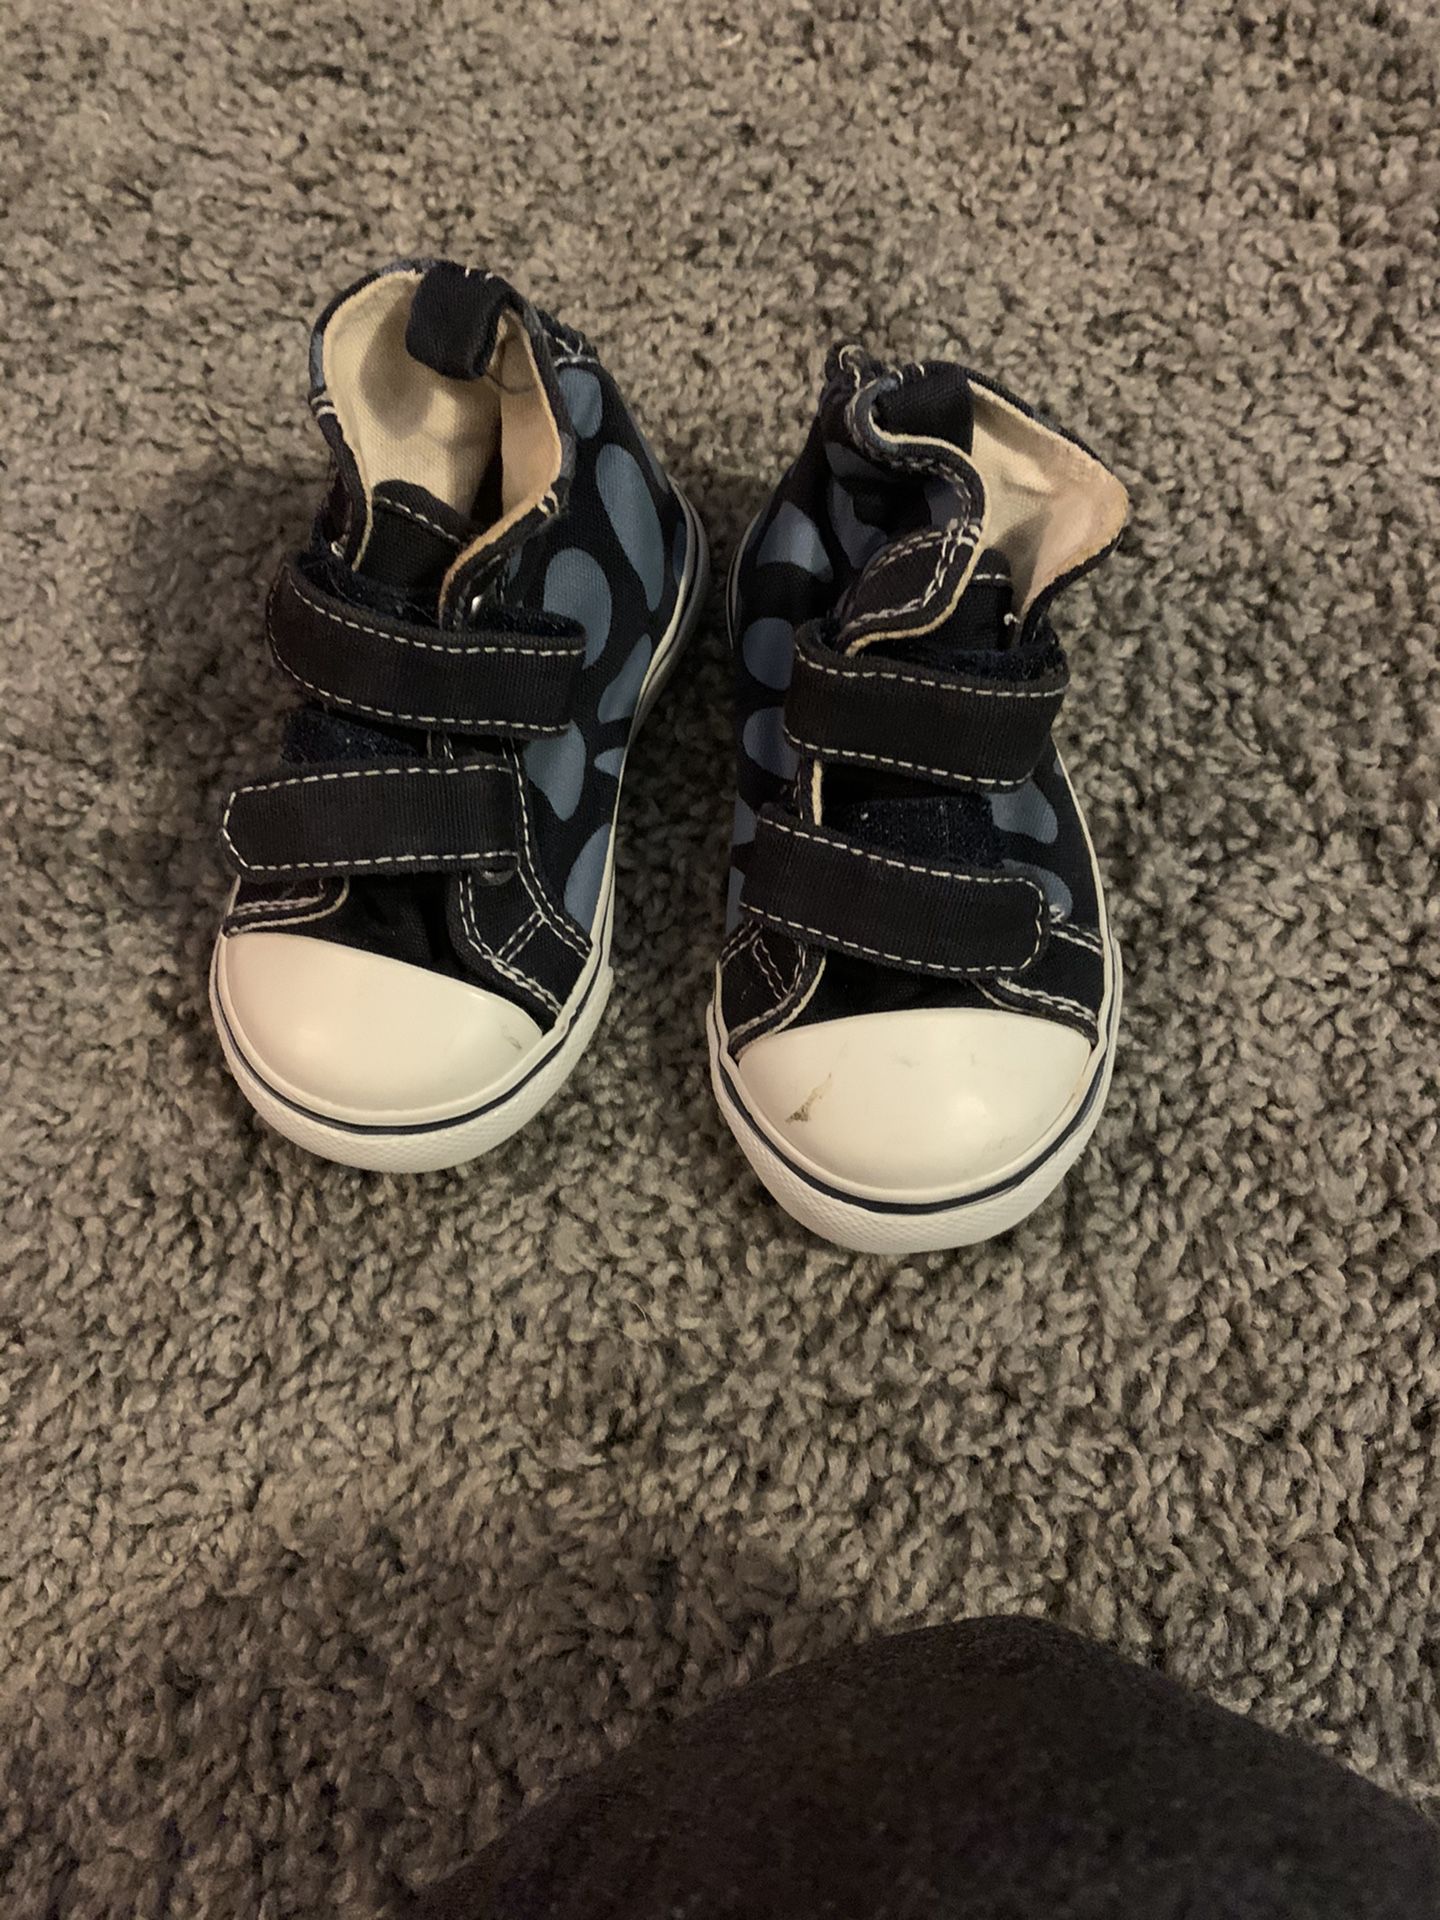 Size 4 Gymboree high top sneakers